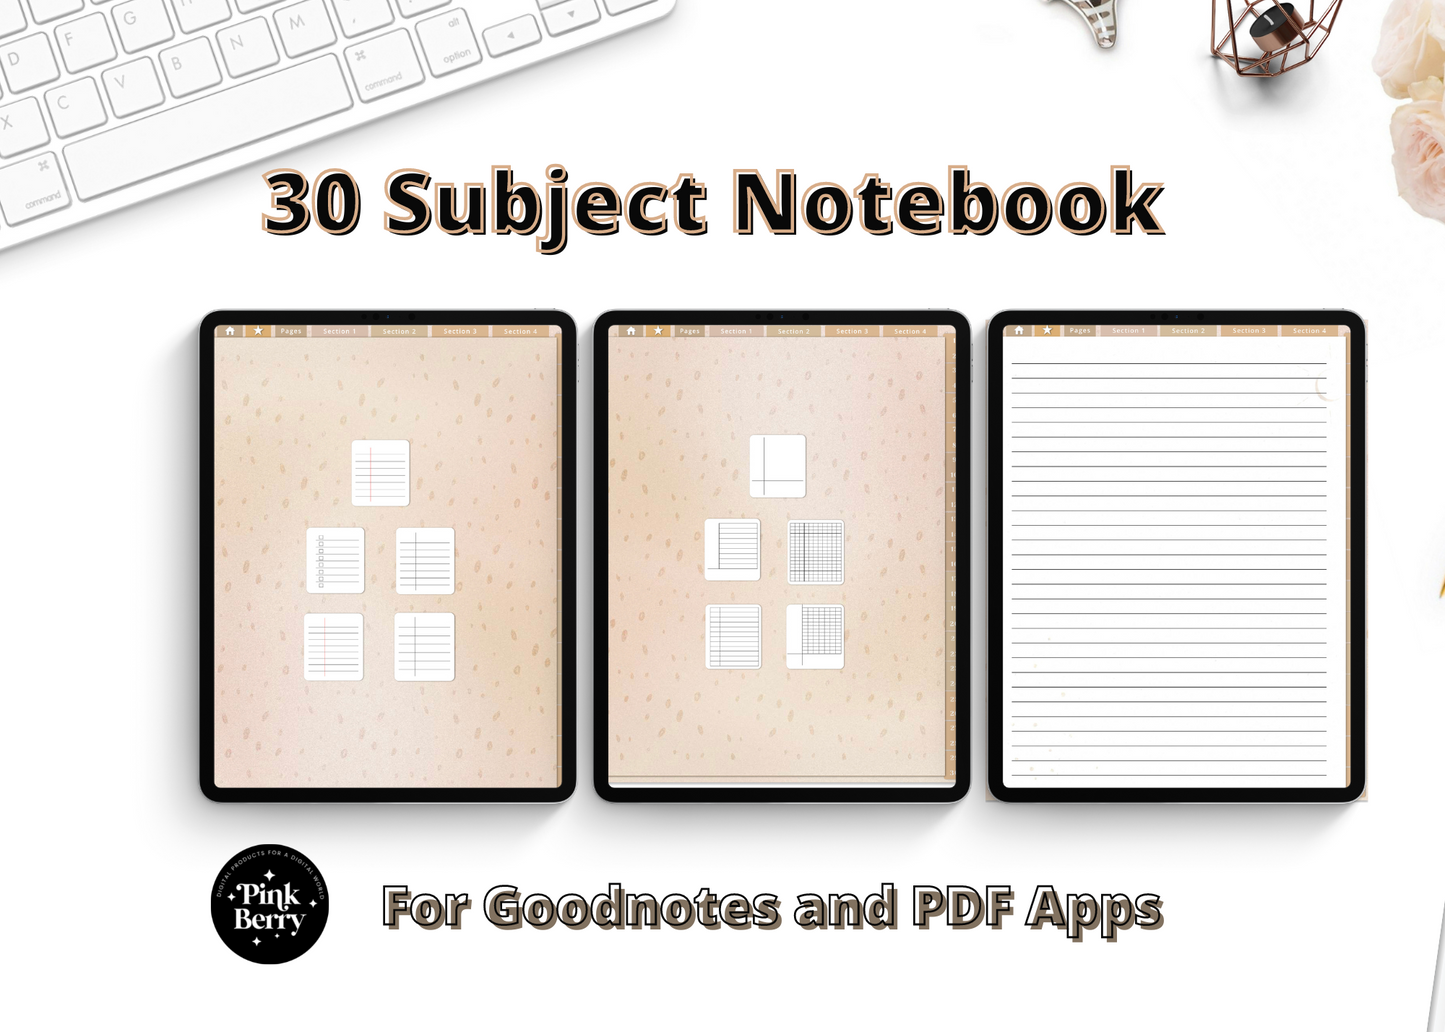 30 Subject Digital Notebook with Hyperlinked Tabs | Take Notes, Journal or Plan For Goodnotes 5